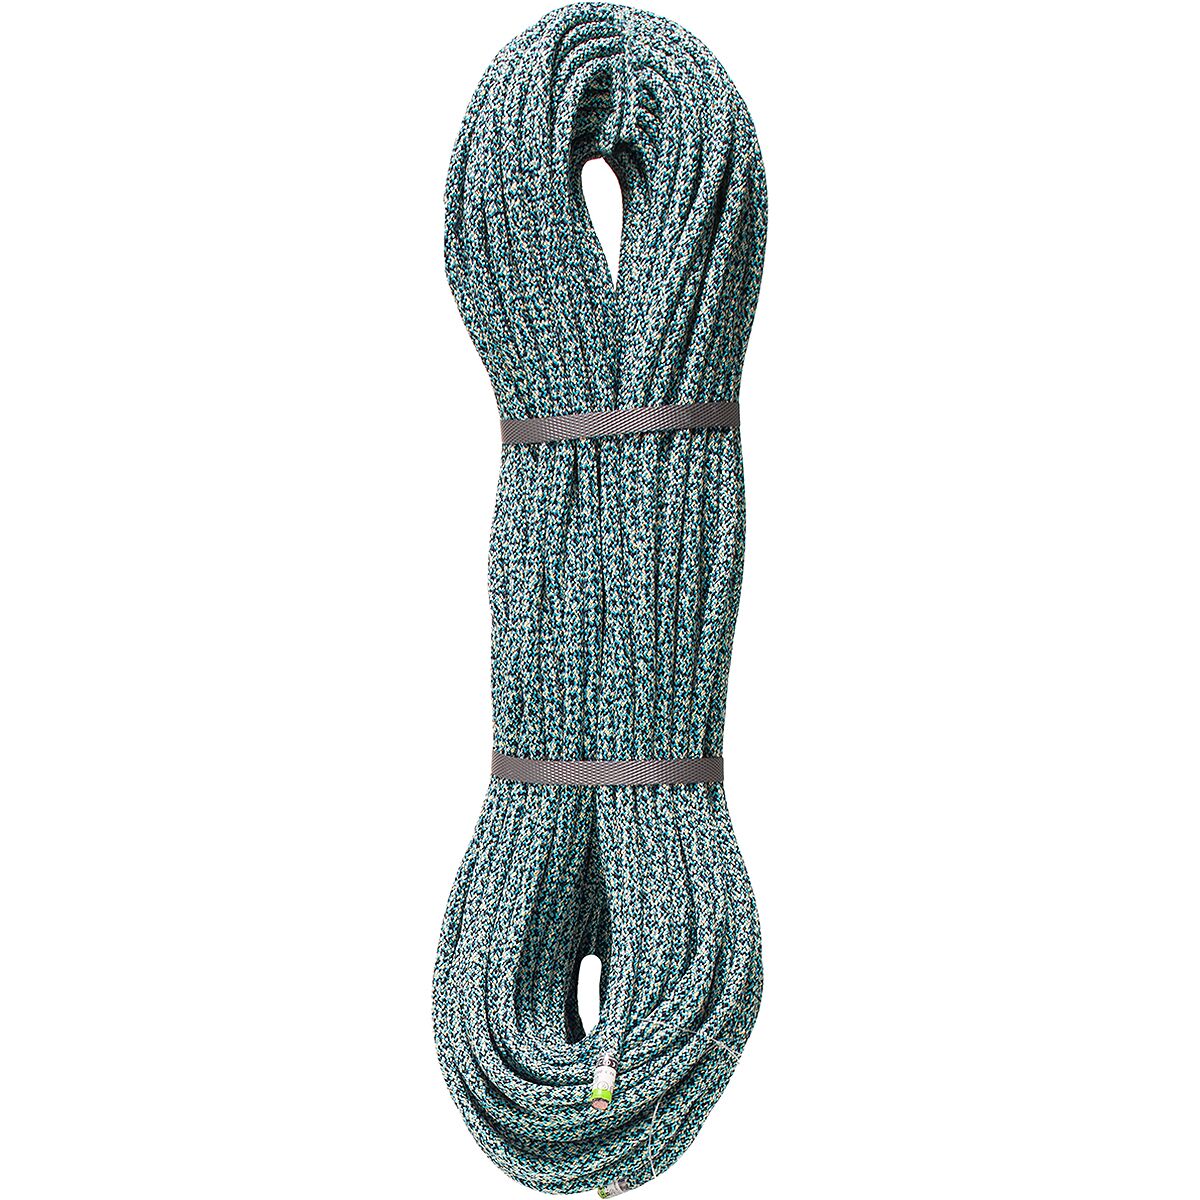 Photos - Climbing Gear Edelrid Starling Protect Pro Dry Climbing Rope - 8.2mm 